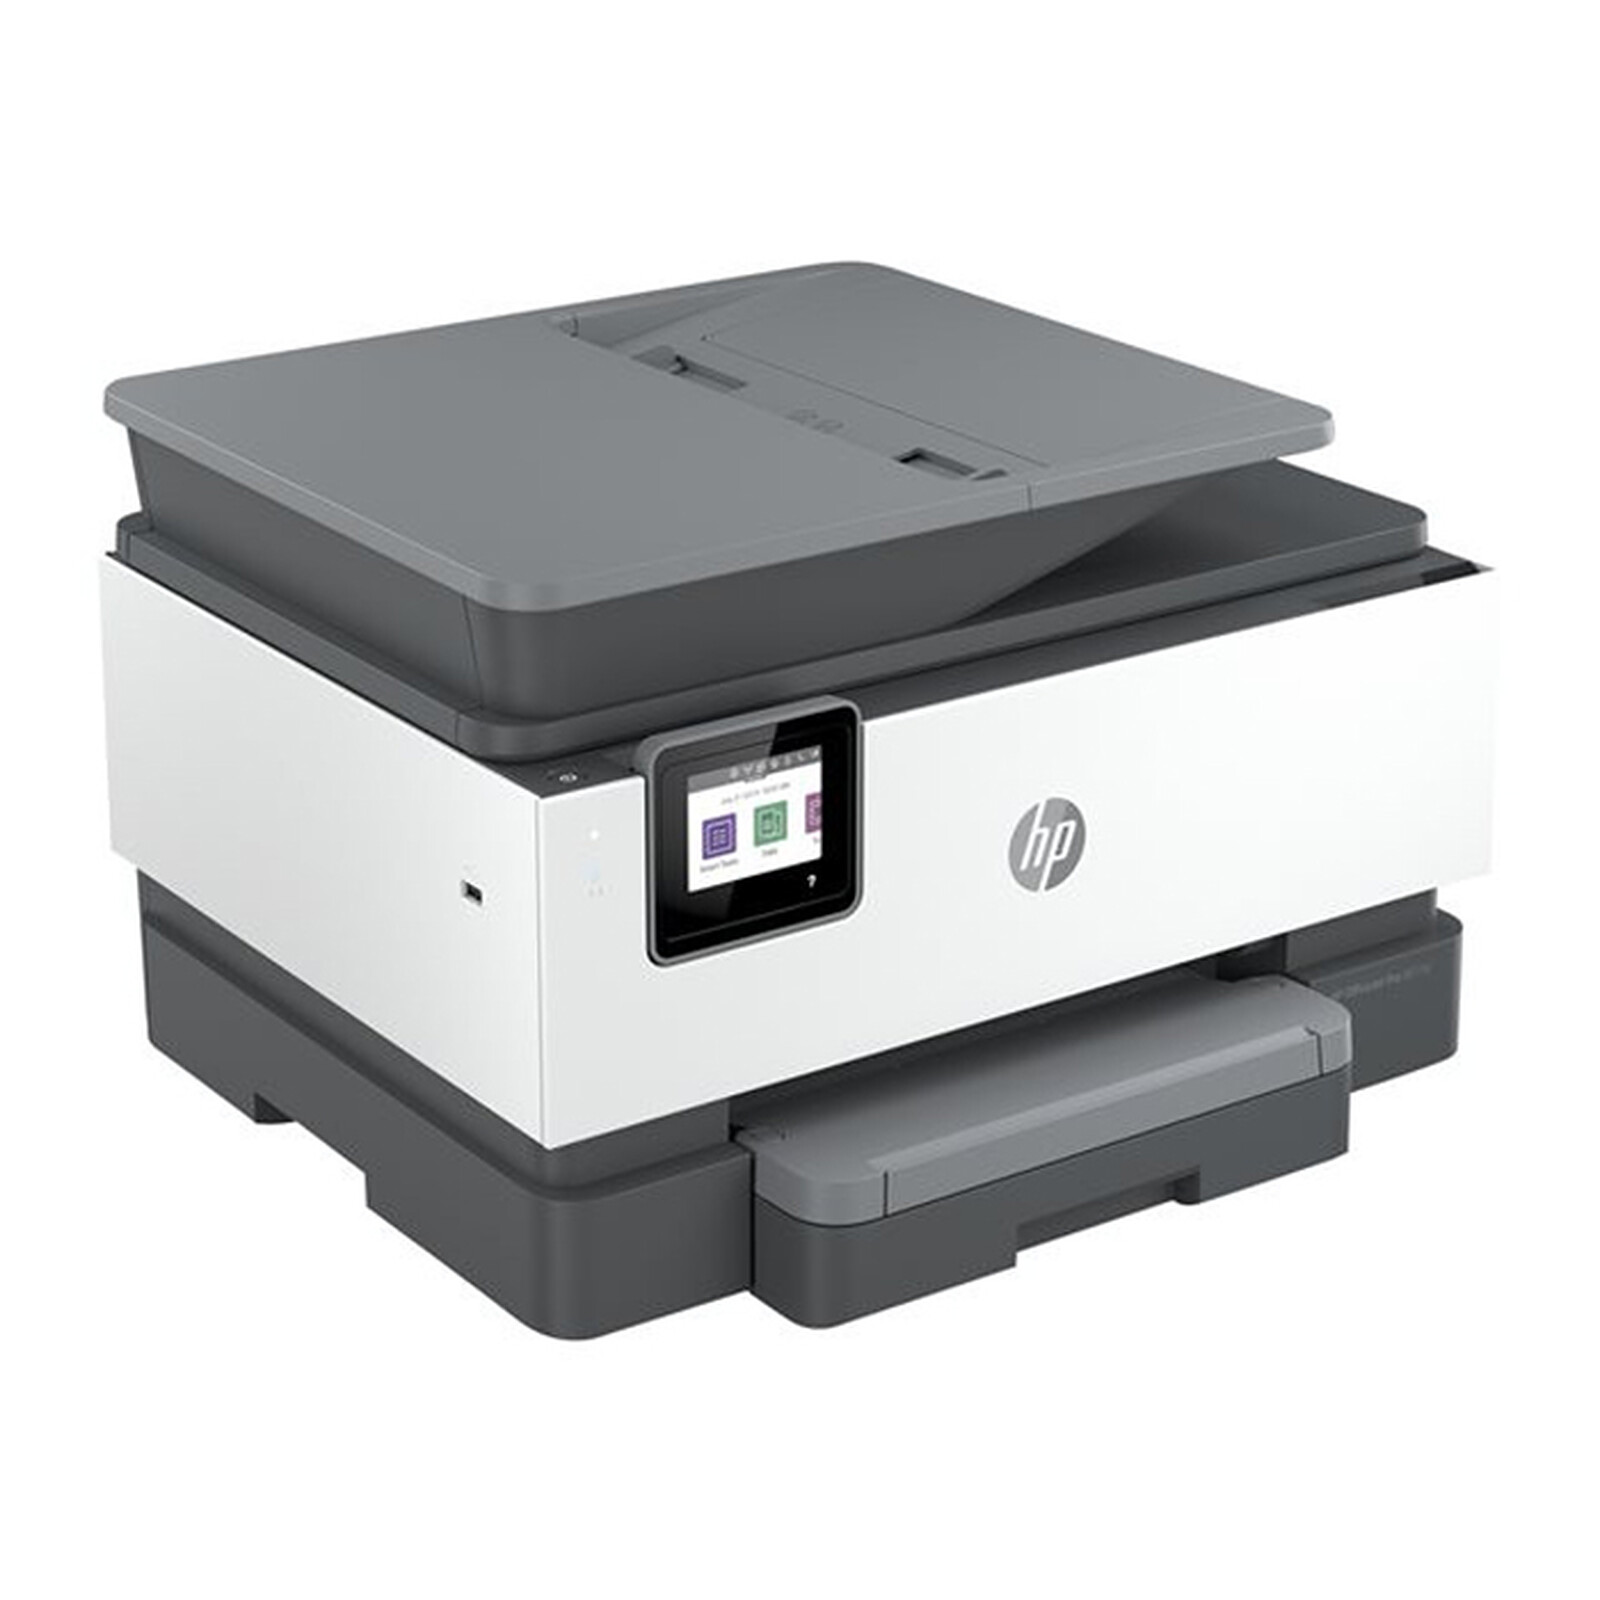 HP OfficeJet Pro 8730 All-in-One Printer Review